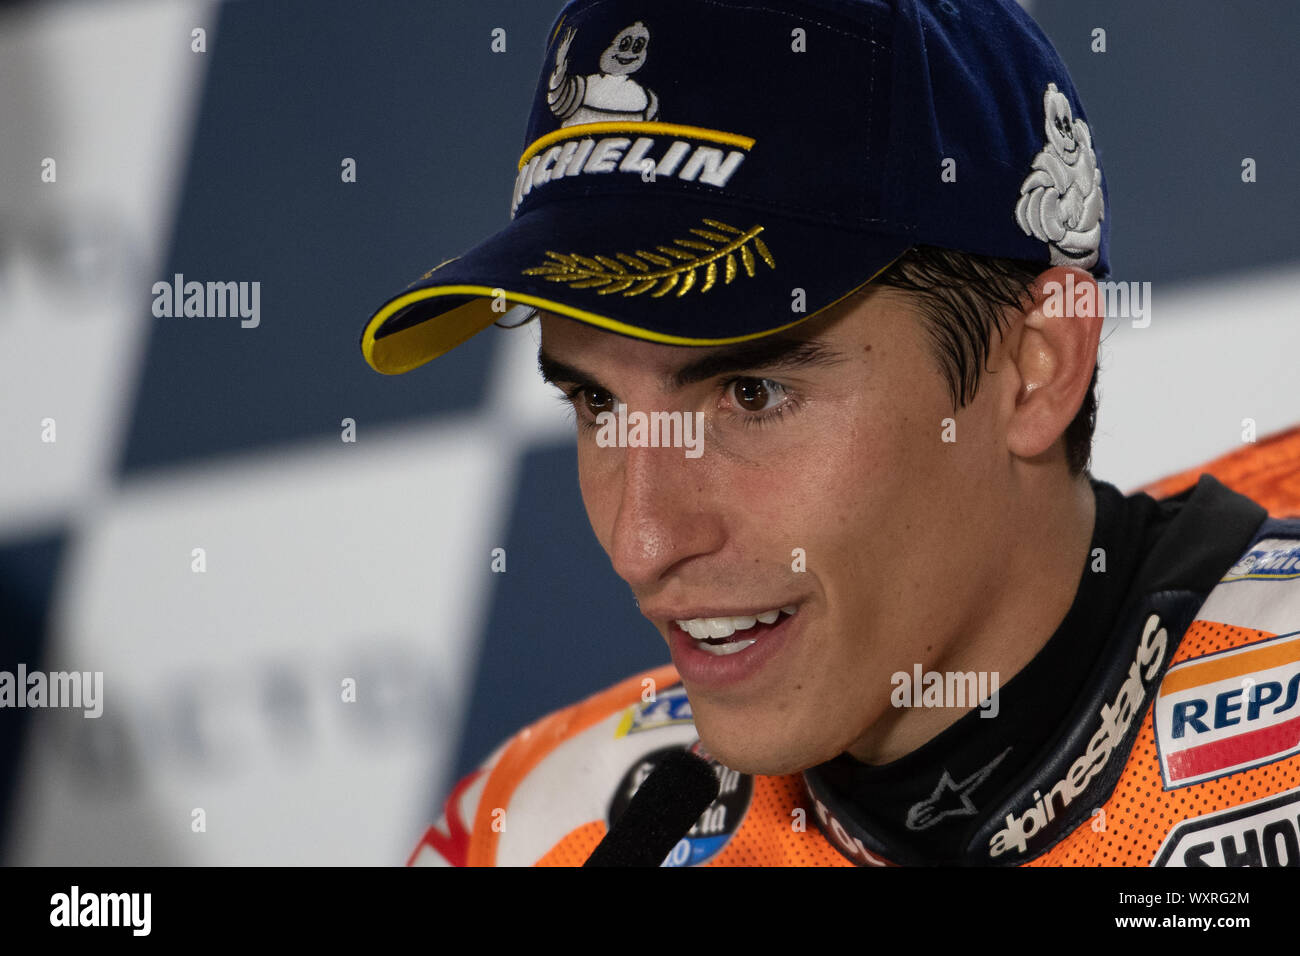 MARC MARQUEZ, SPANISH RIDER AND MOTOGP WORLD CHAMPION WITH NUMBER 93 FOR REPSOL HONDA TEAM  during Thursday And Sunday Press Conference Of The Motogp Stock Photo